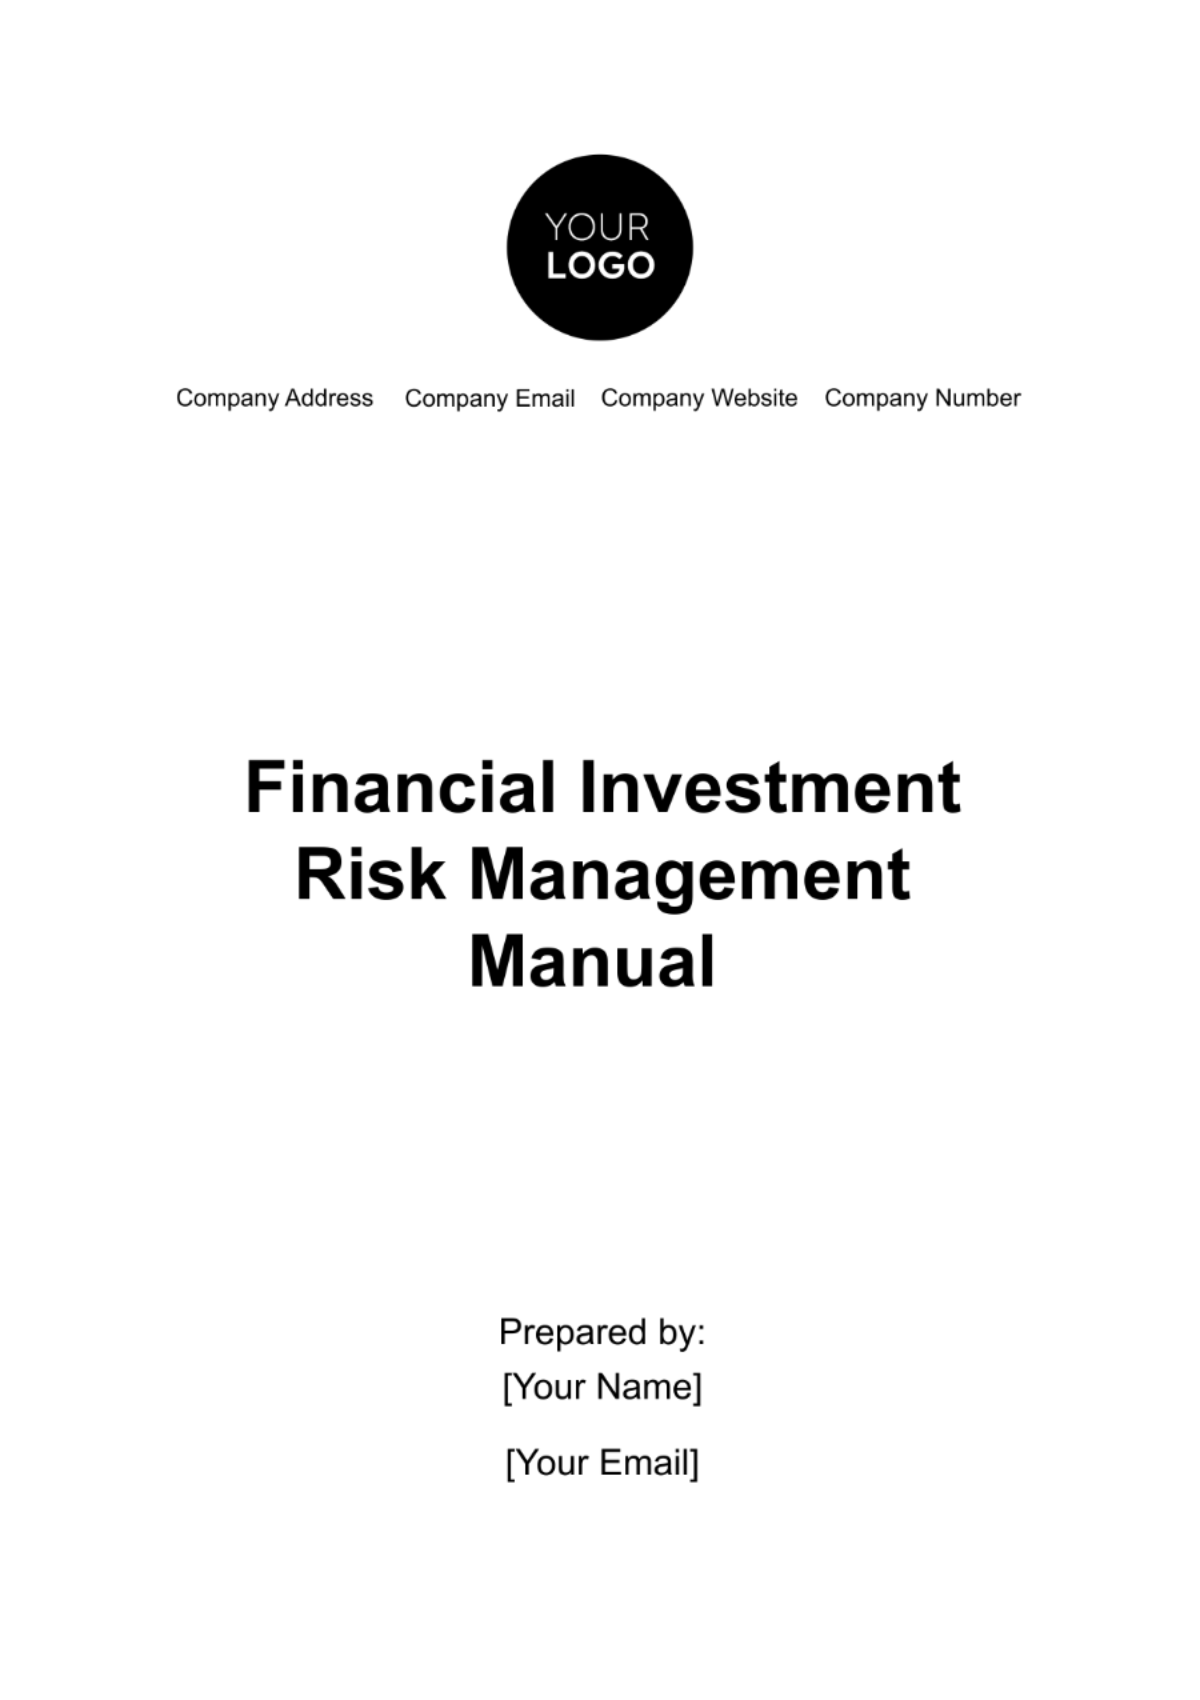 Financial Investment Risk Management Manual Template